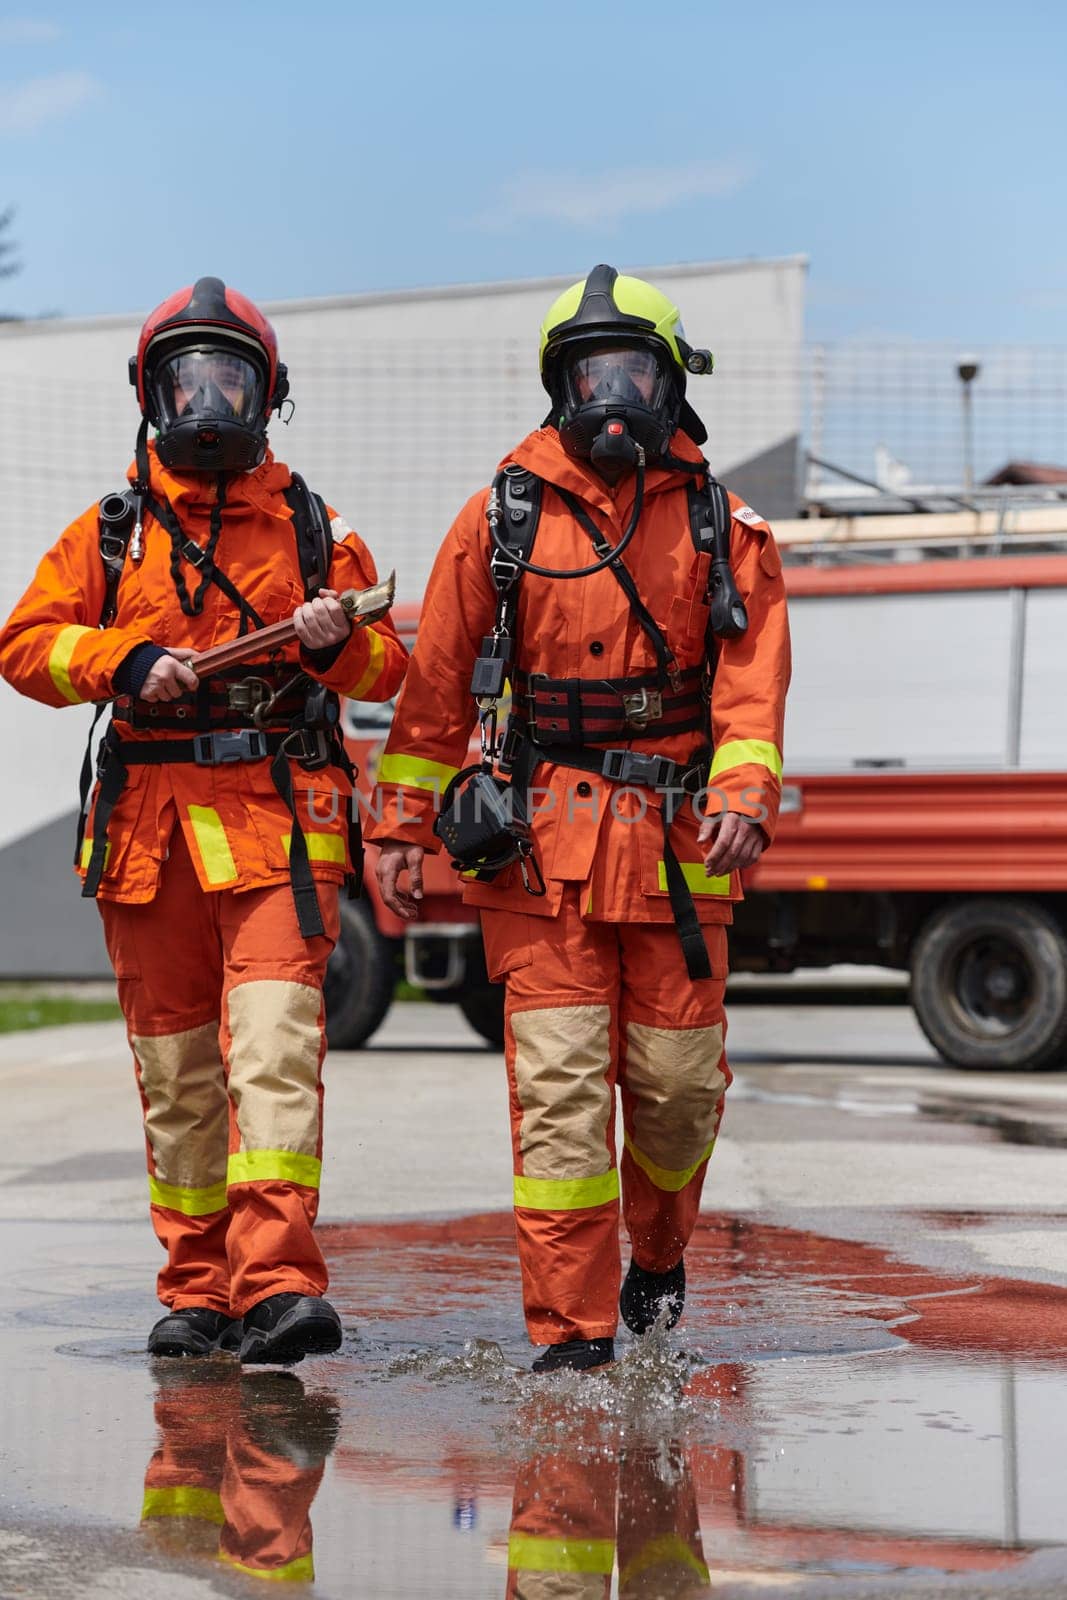 A team of confident and accomplished firefighters strides purposefully in their uniforms, exuding pride and satisfaction after successfully completing a challenging firefighting mission.